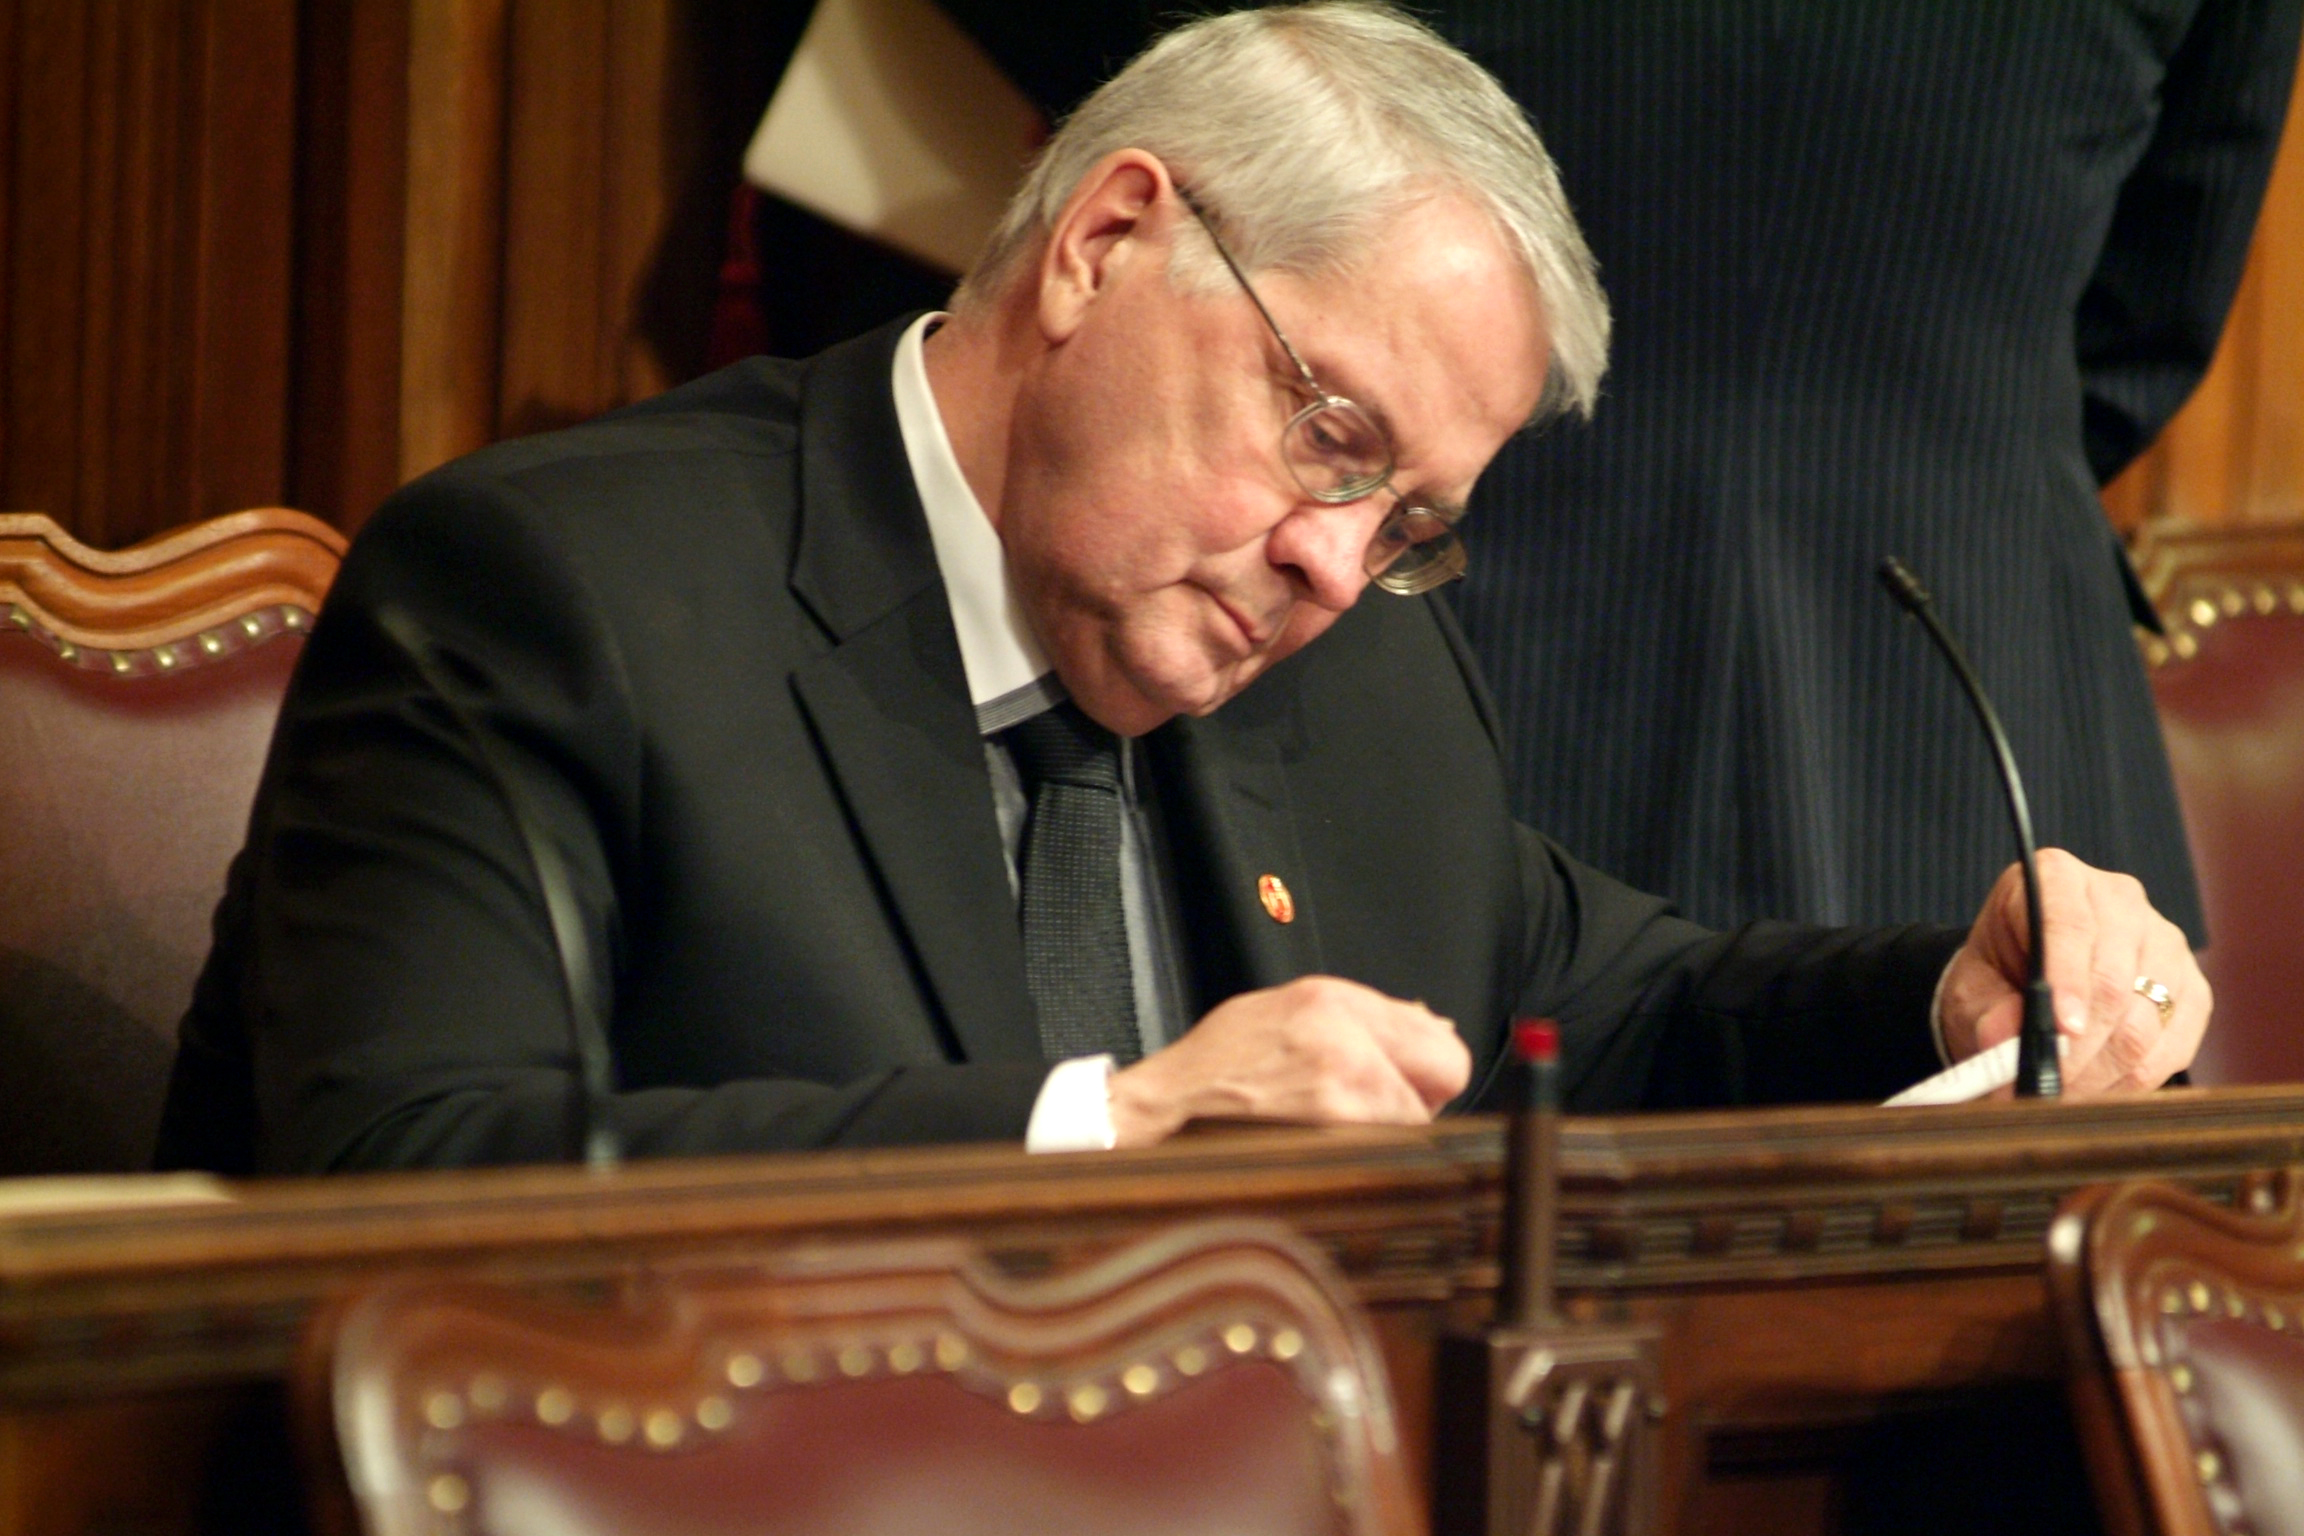 Senator Richard Neufeld is photographed during his swearing-in ceremony in 2009.